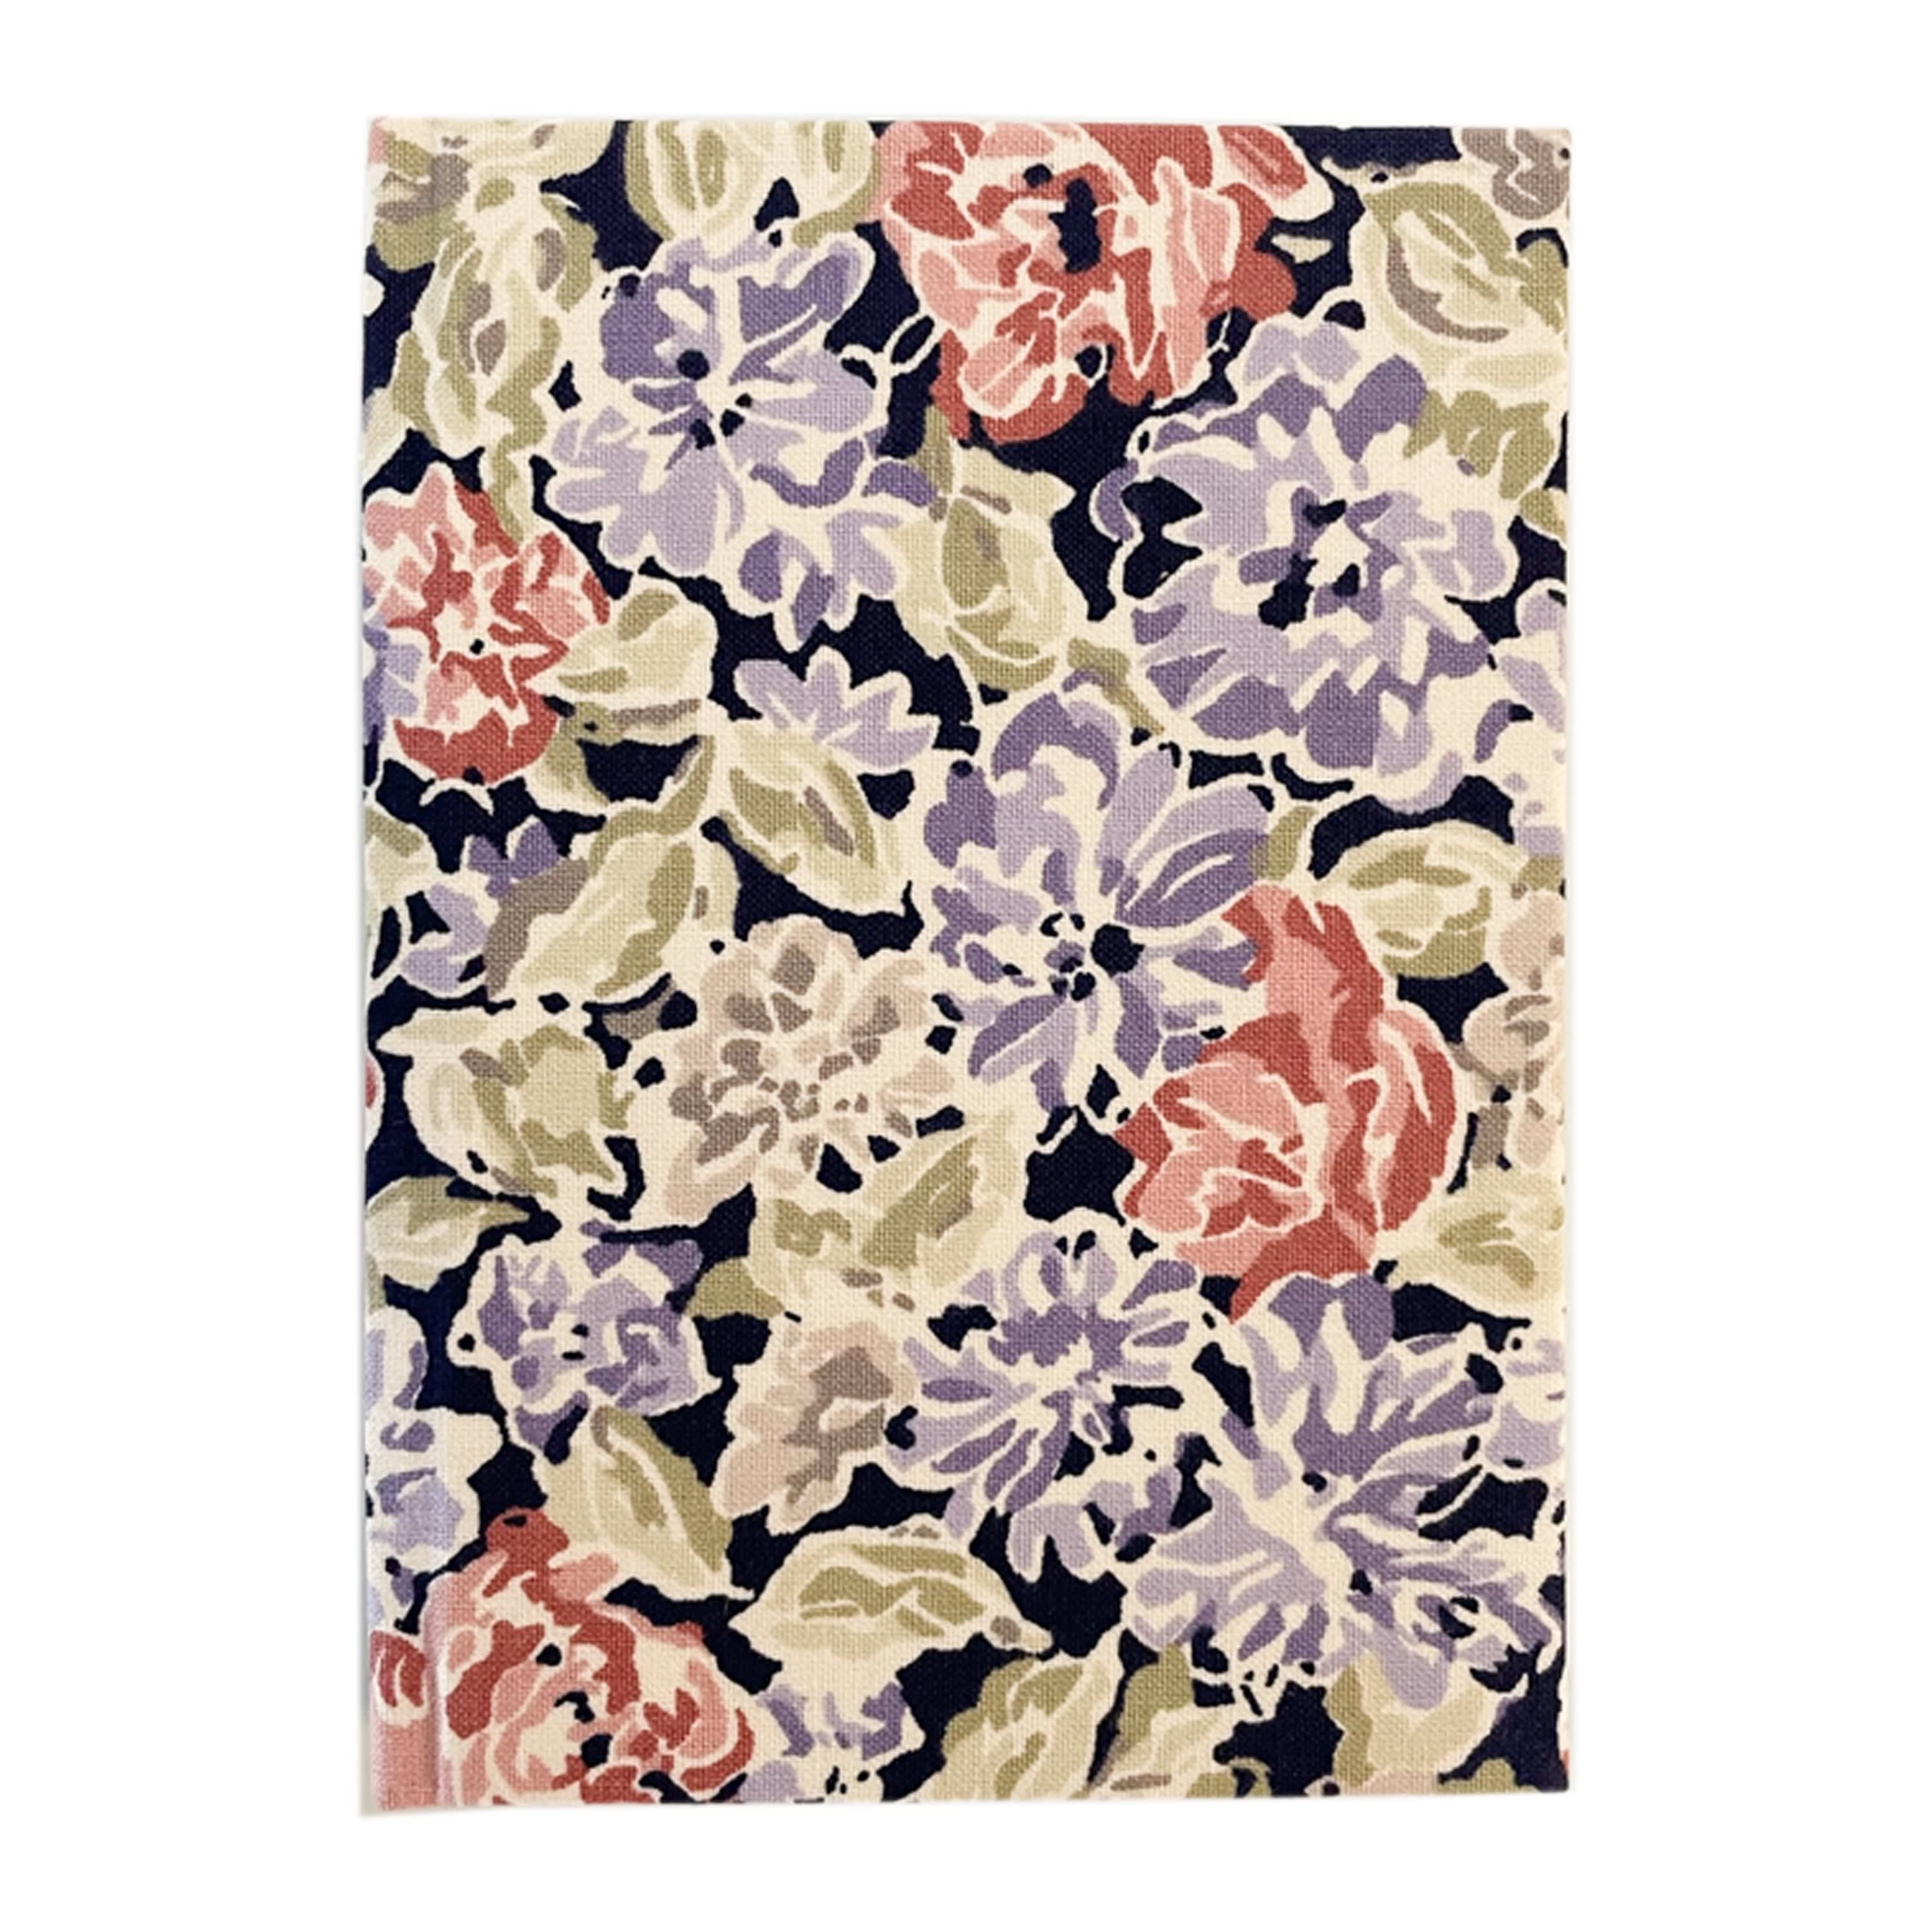 Dark Floral Liberty Of Vintage Print Sustainable Fabric Covered Lined A6 Notebook | Studio Courtenay | Wolf & Badger